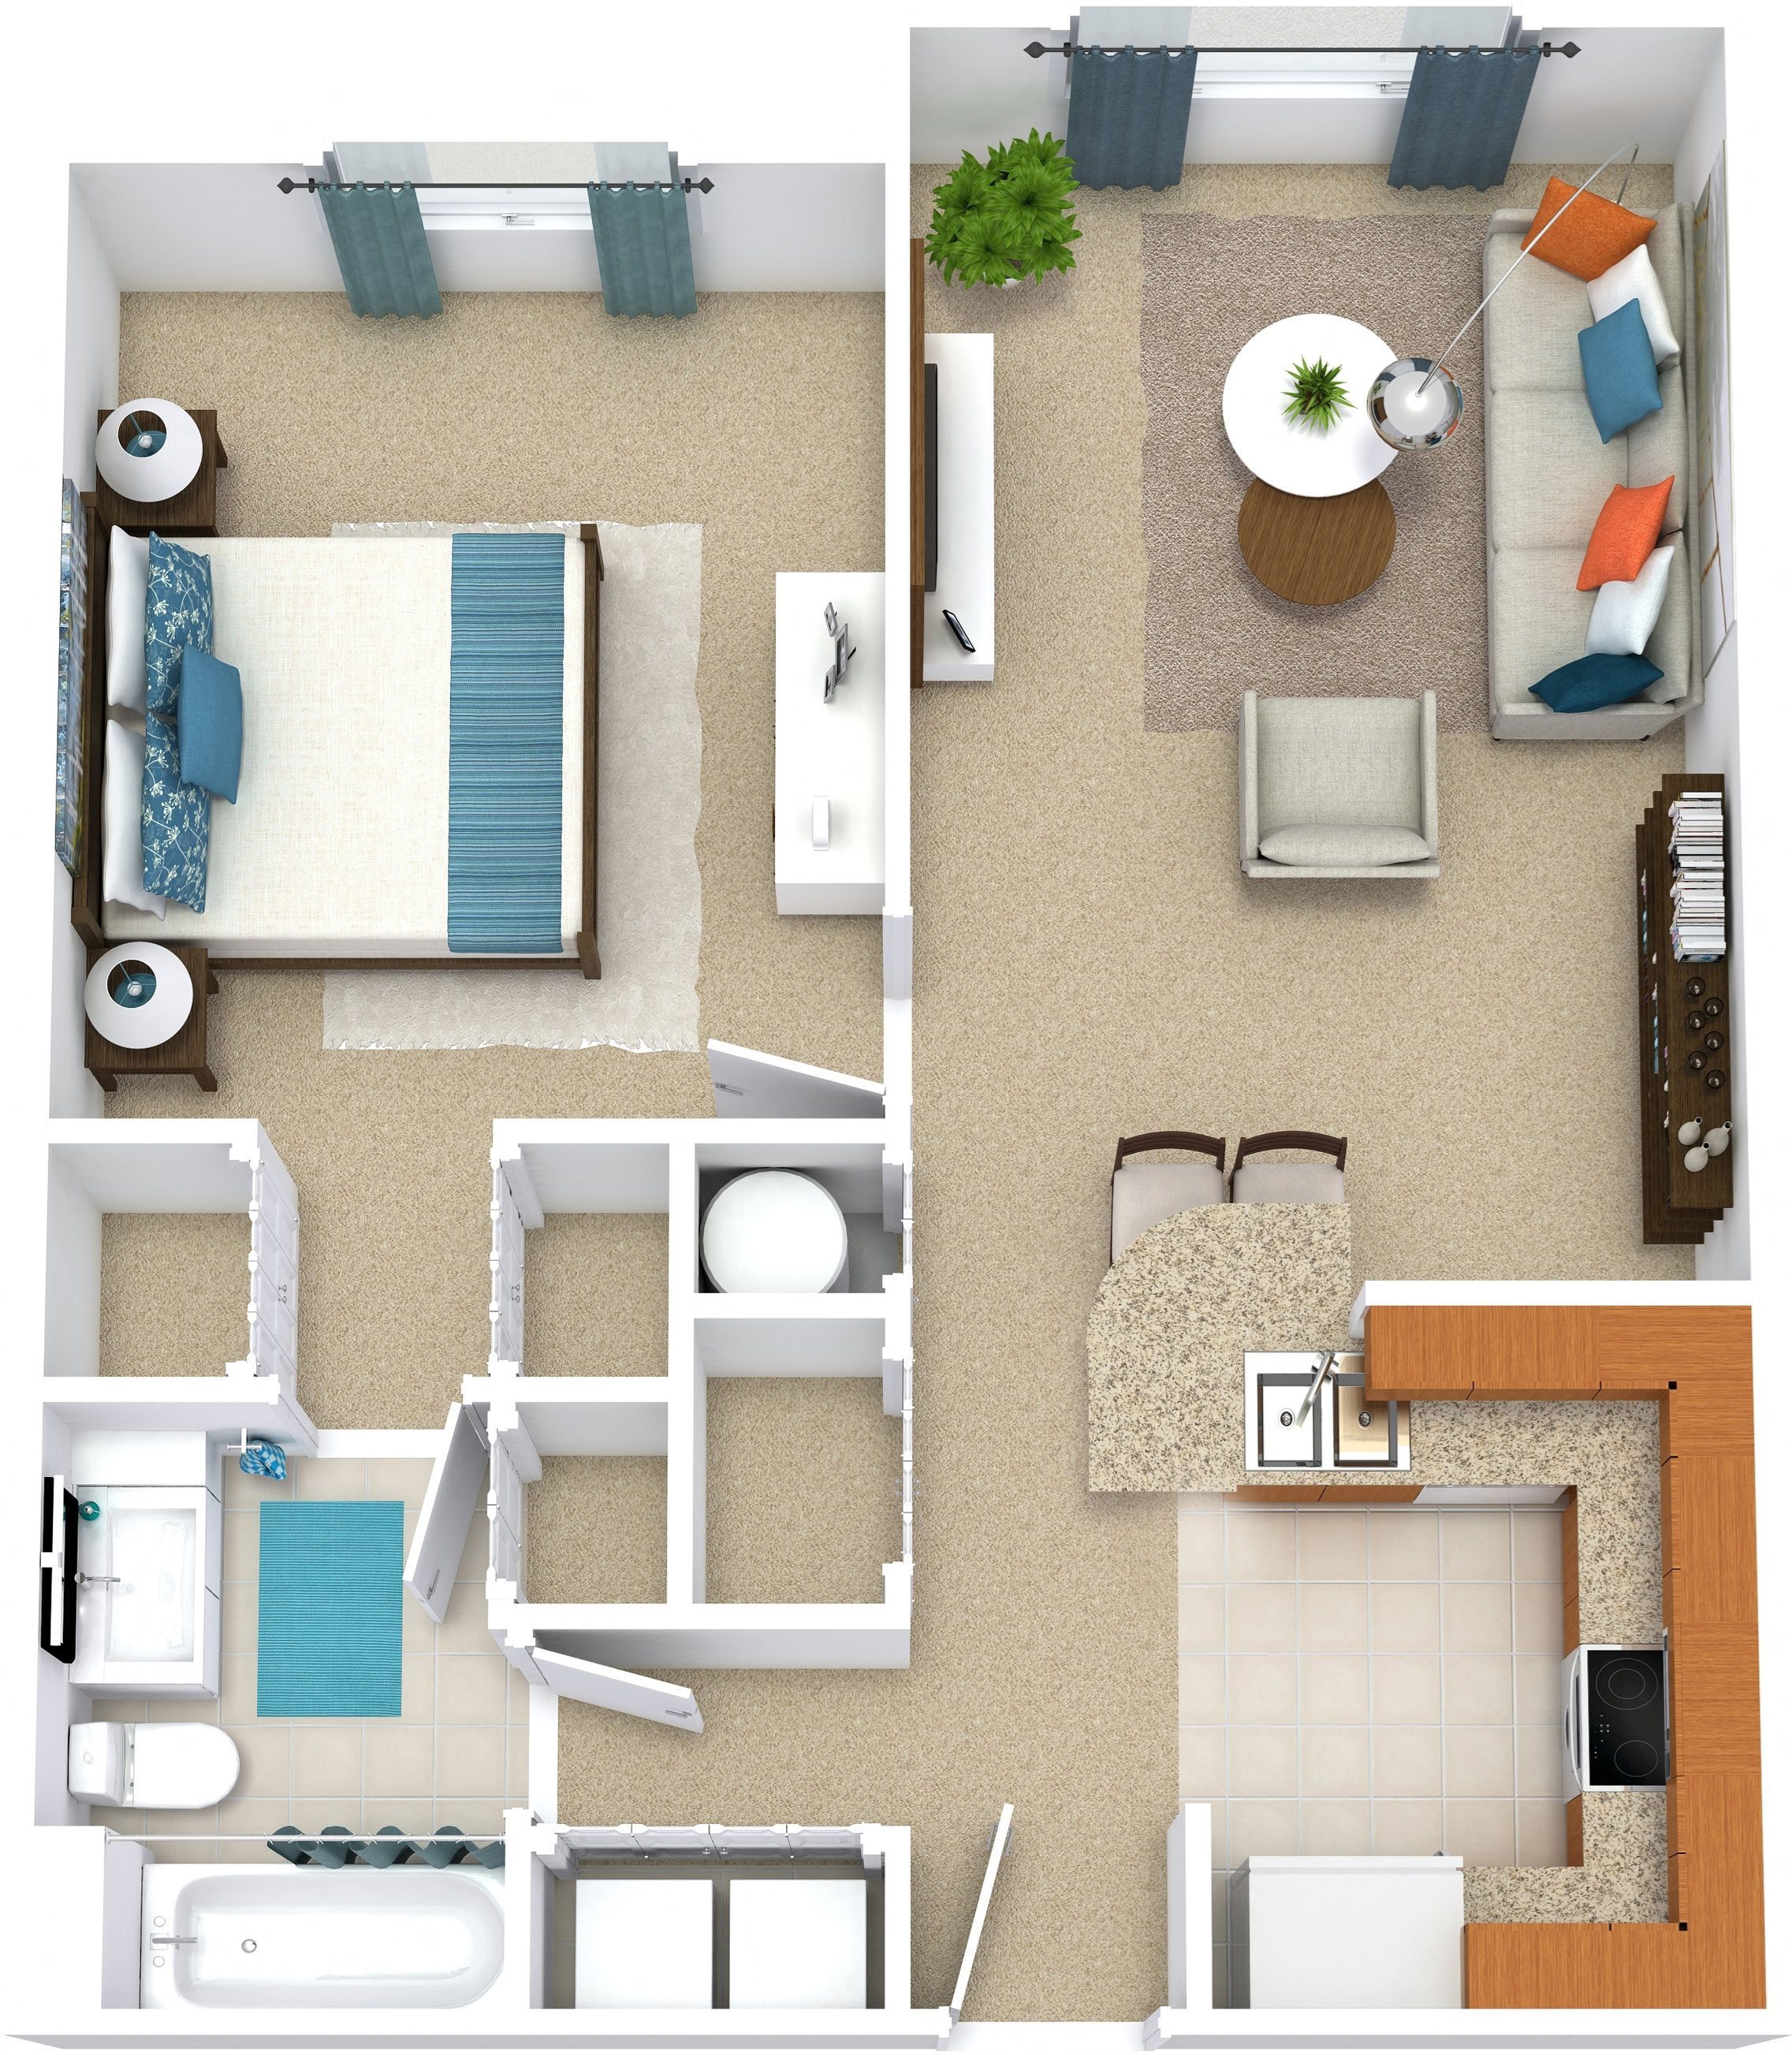 Floor Plans Of Mission Club Apartments In Orlando